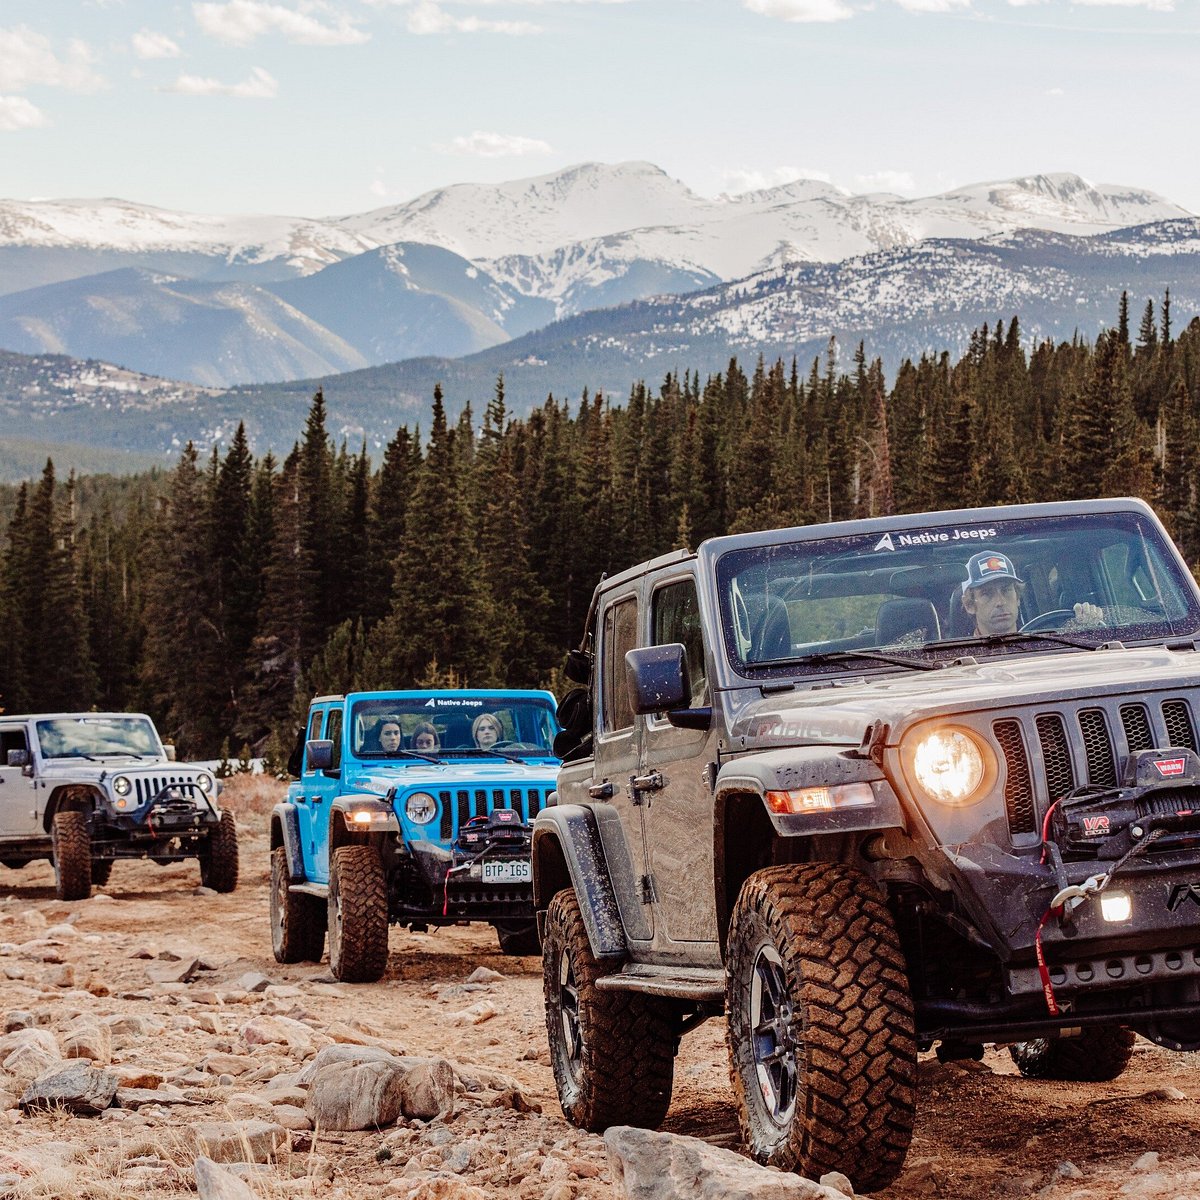 Jeep Tours Colorado by Native Jeeps (Denver) - All You Need to Know ...